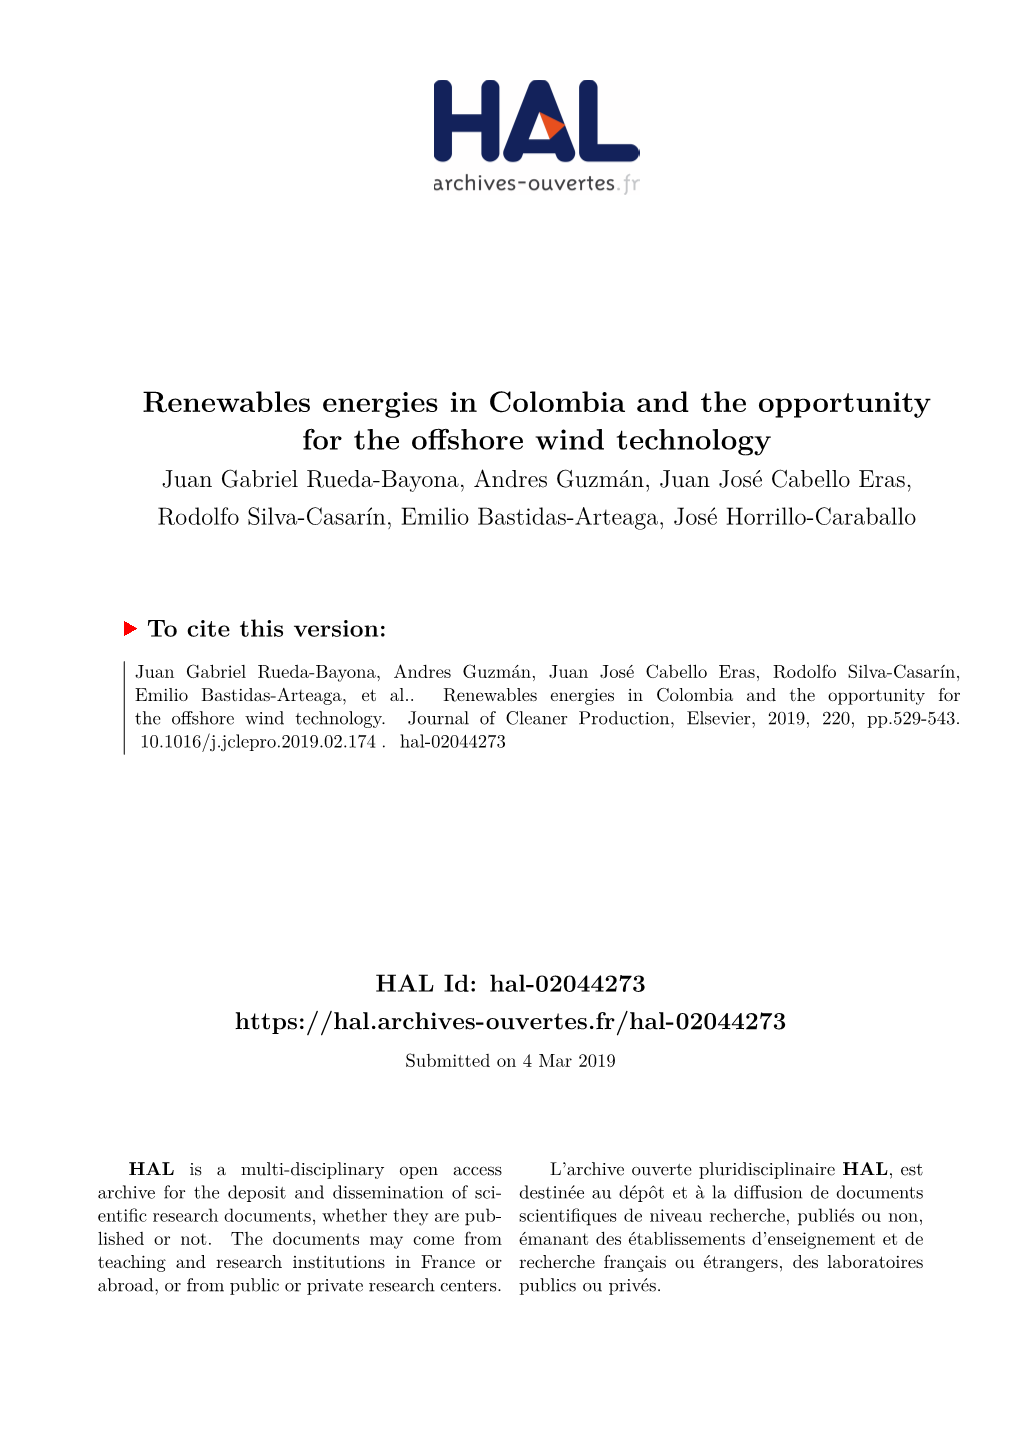 Renewables Energies in Colombia and the Opportunity for the Offshore